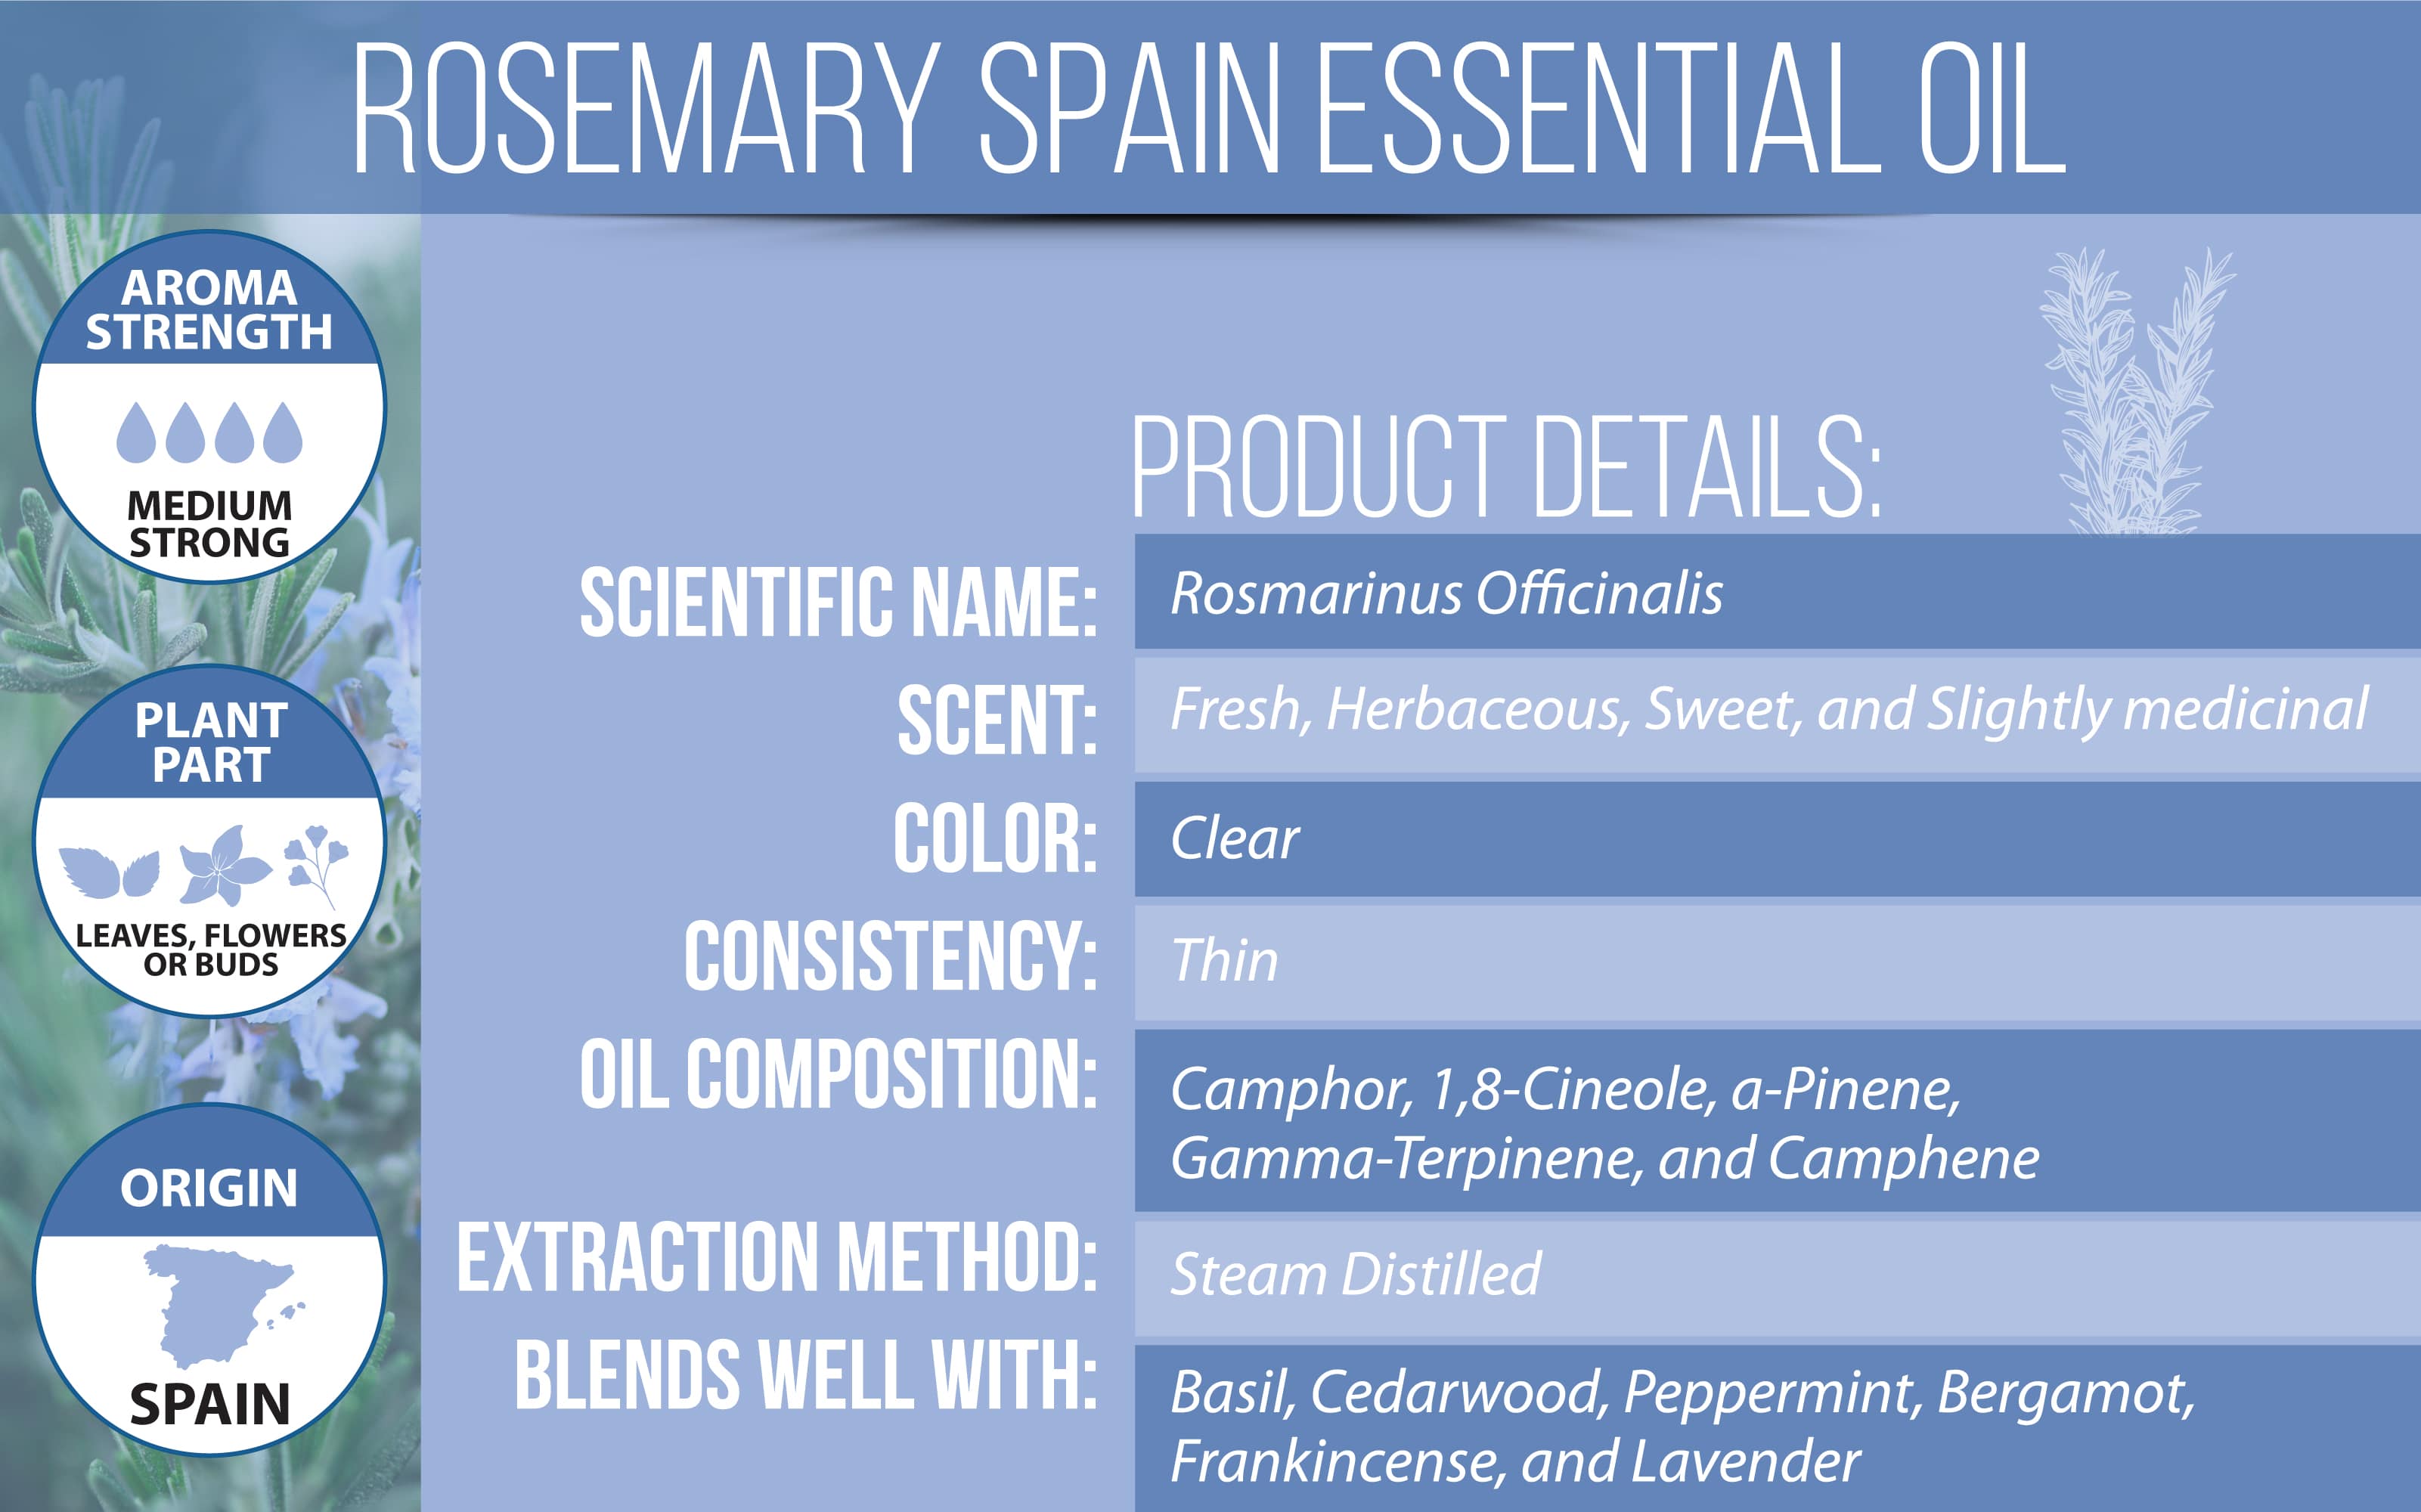 Spanish Rosemary Essential Oil Product Details